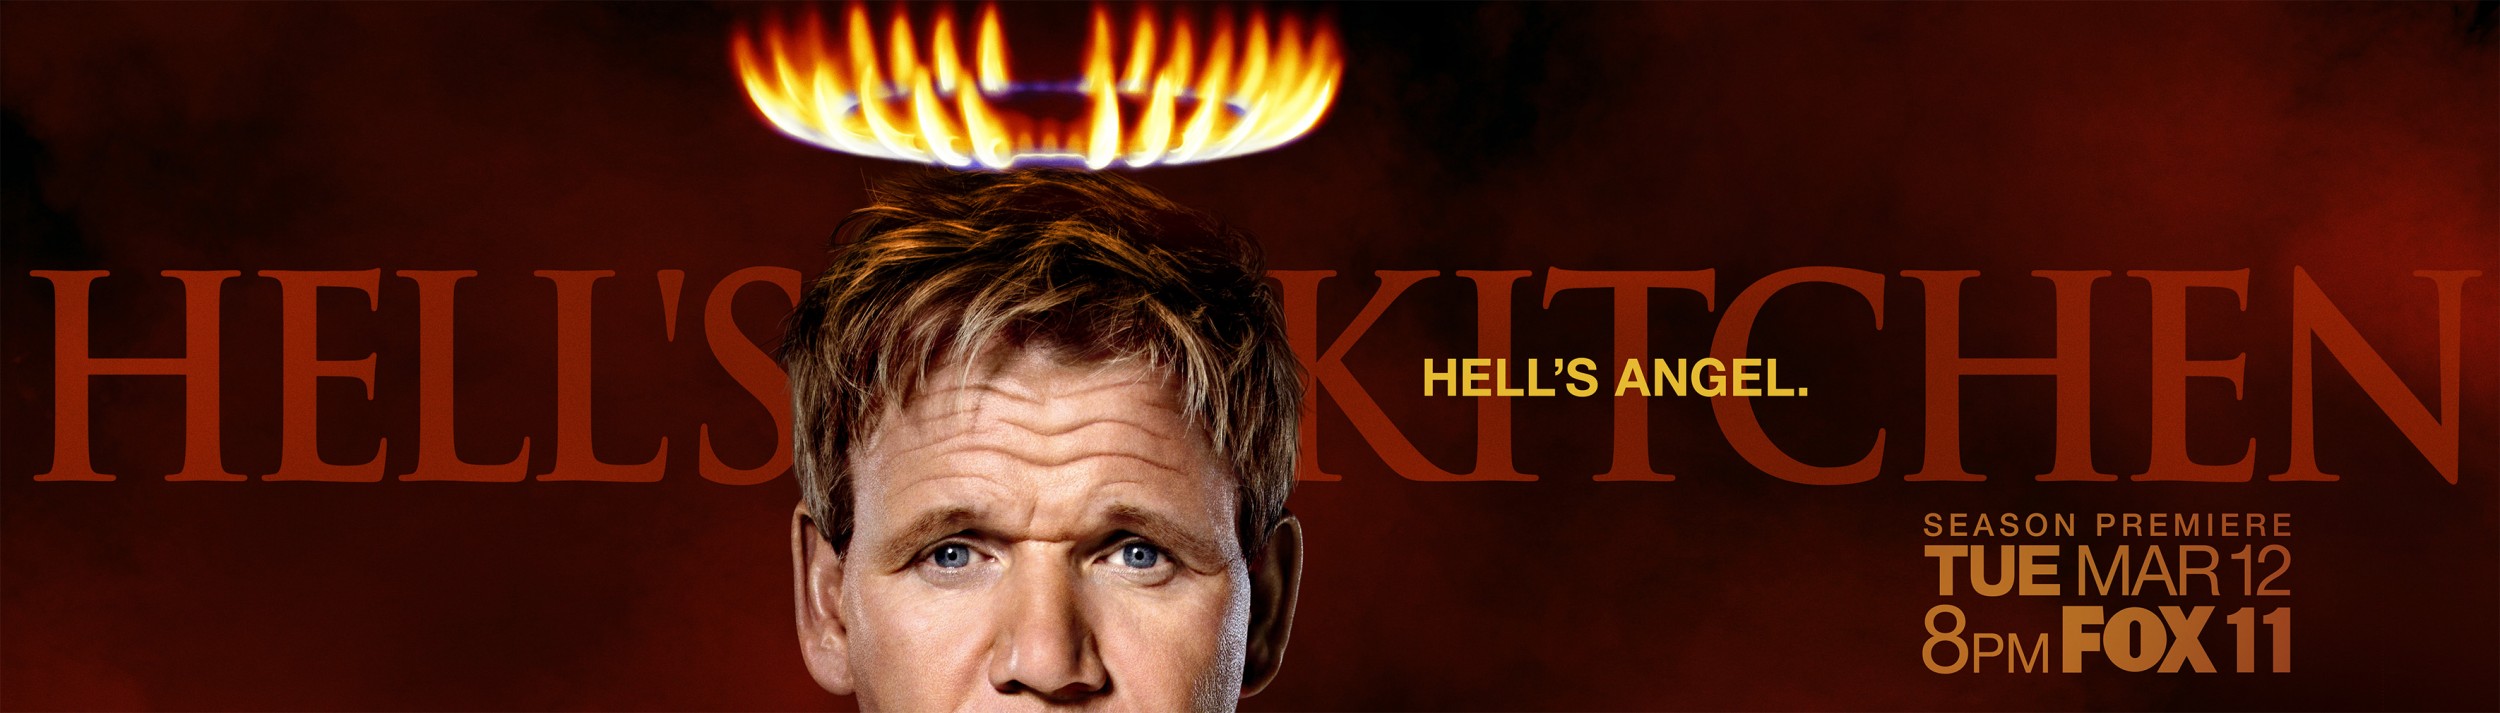 Mega Sized TV Poster Image for Hell's Kitchen (#6 of 10)